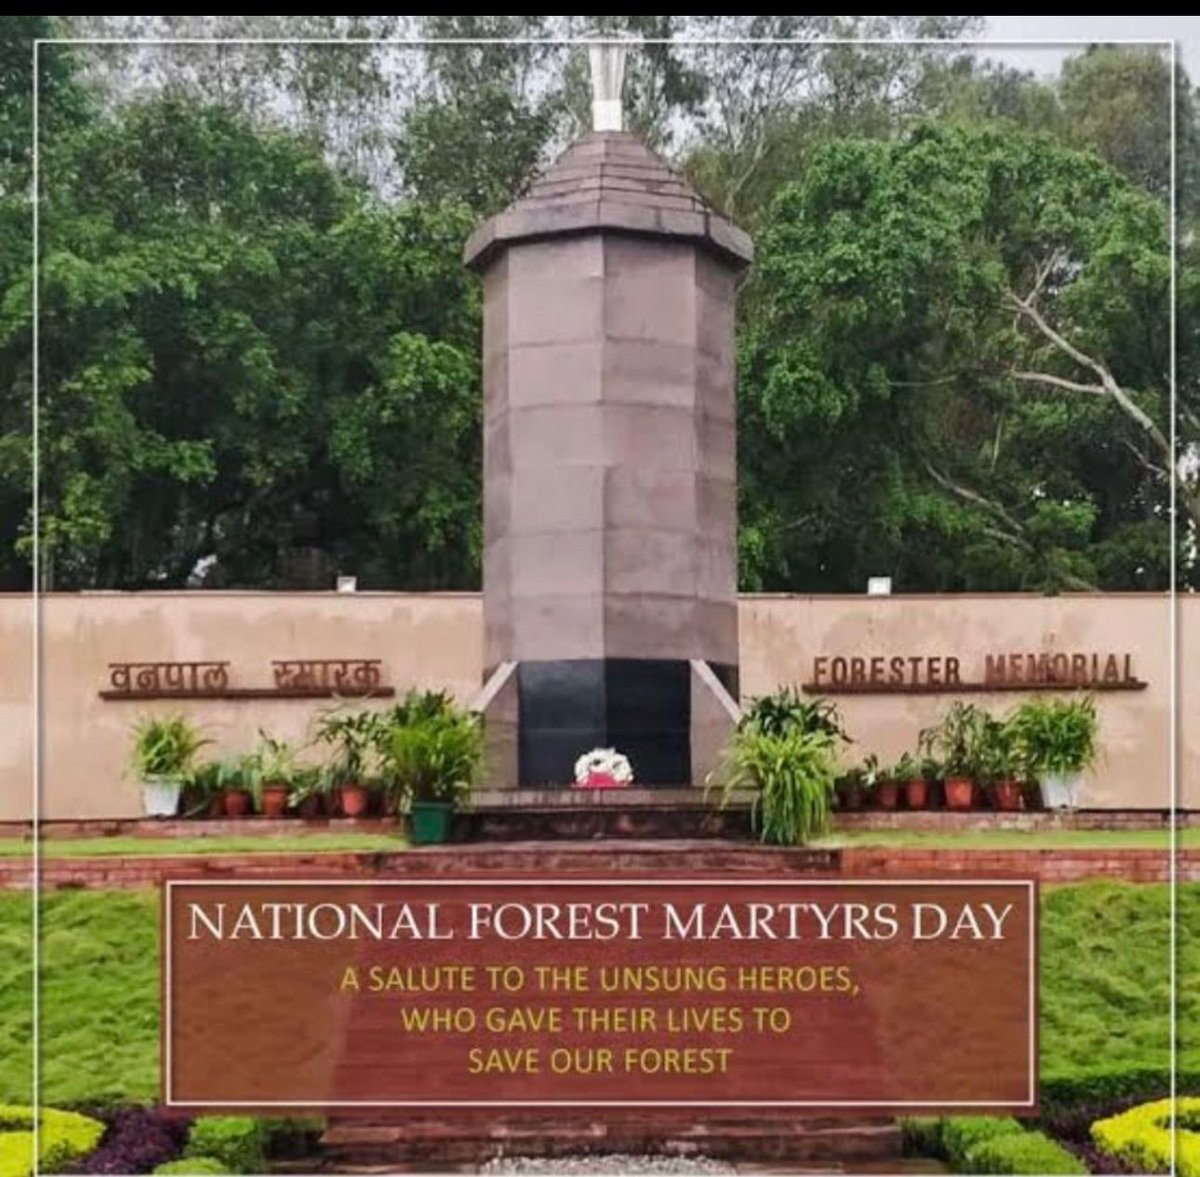 I salute all those who laid down their lives while trying to save our forests and the wildlife it sustains on National Forest Martyrs Day. Generations remain indebted to you for your selfless sacrifice.